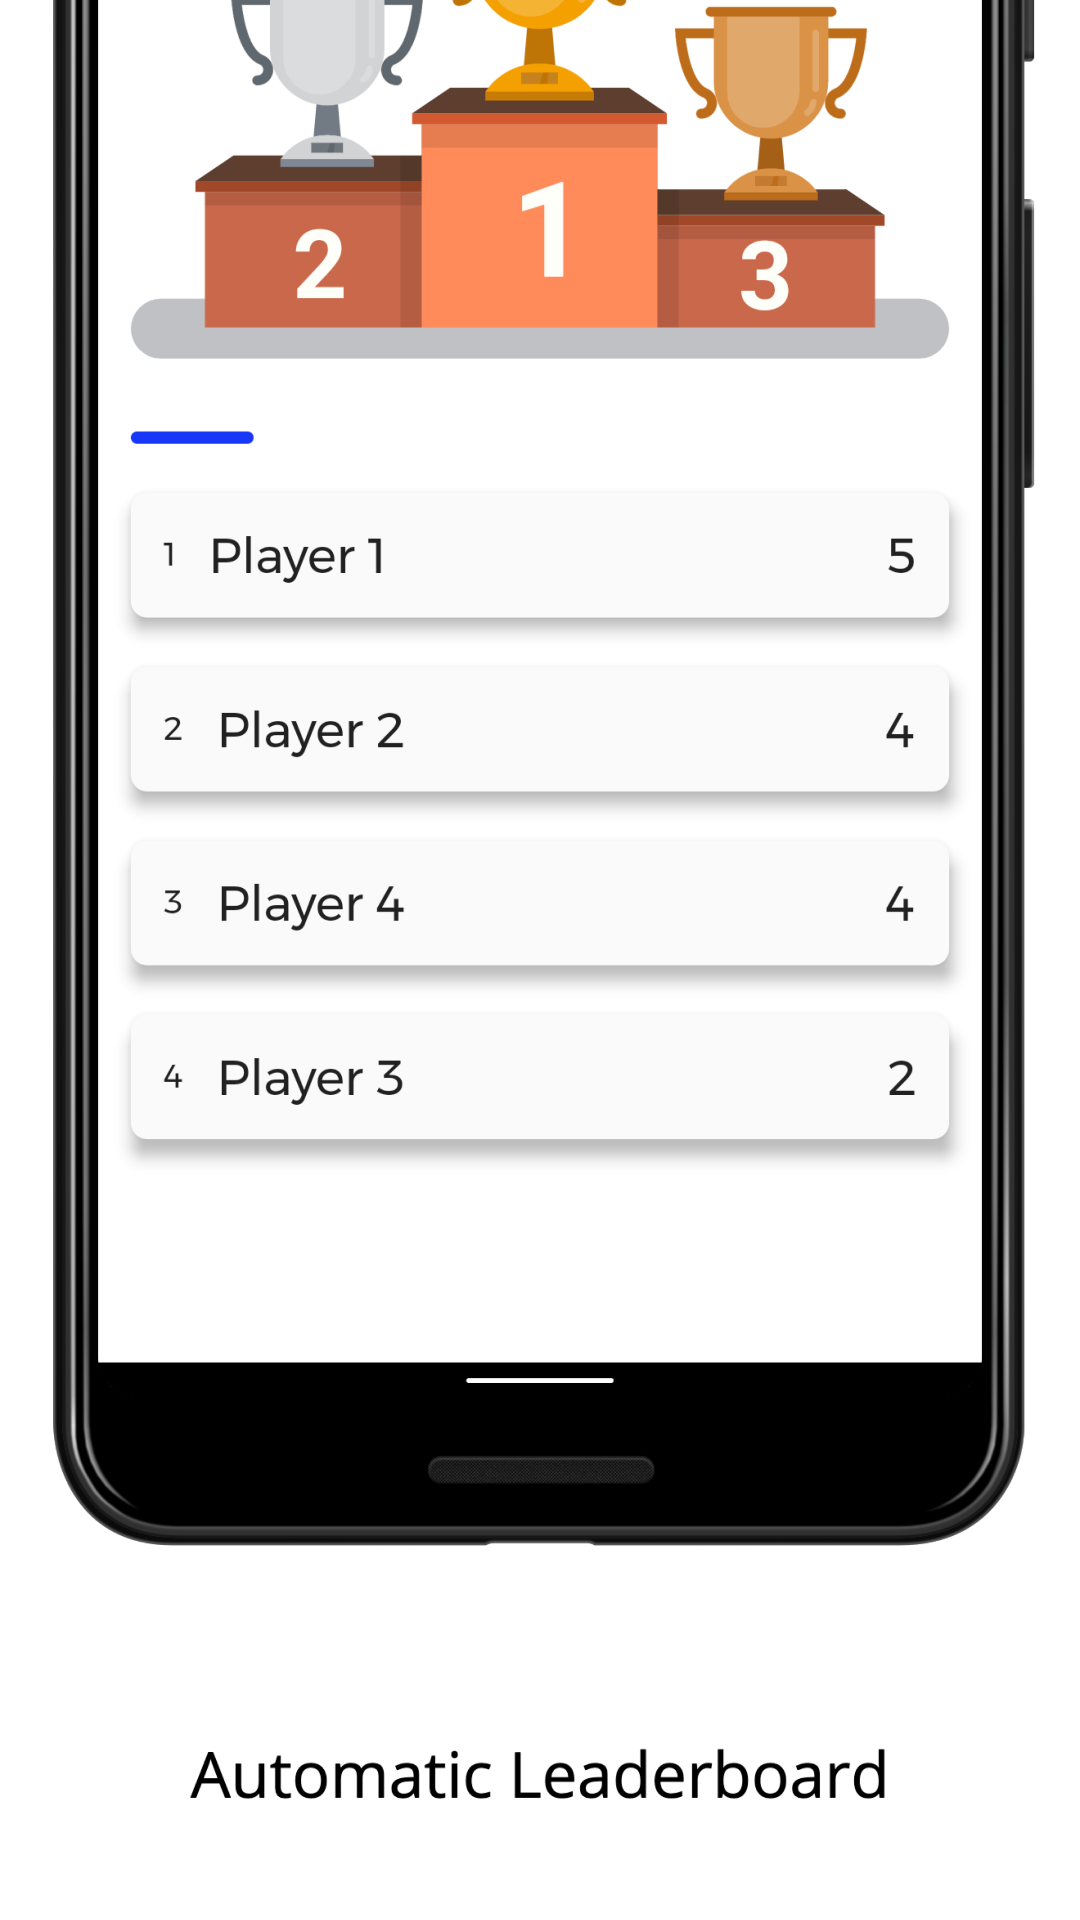 GitHub - xljiang/tournament-manager: An interactive Android app to manage  game tournaments. The app allows referees to easily add participants,  generate match schedule, manage results, and view statistics, etc.